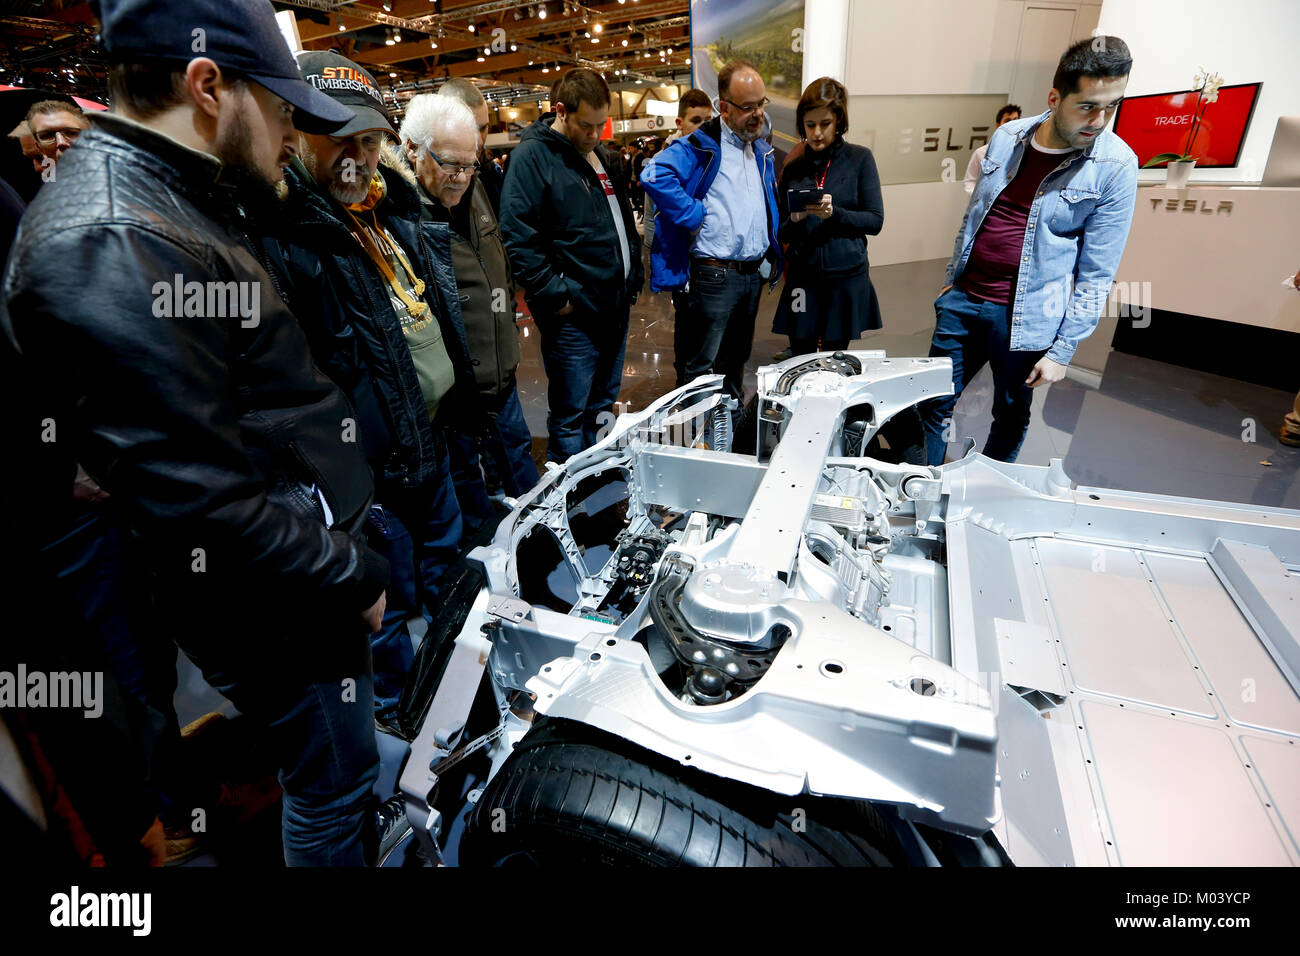 Brussels, Belgium. 18th Jan, 2018. Visitors look on a chassis of Tesla during the 96th European Motor Show in Brussels, Belgium, Jan. 18, 2018. The motor show opened to public from Jan. 12 to 21. Credit: Ye Pingfan/Xinhua/Alamy Live News Stock Photo